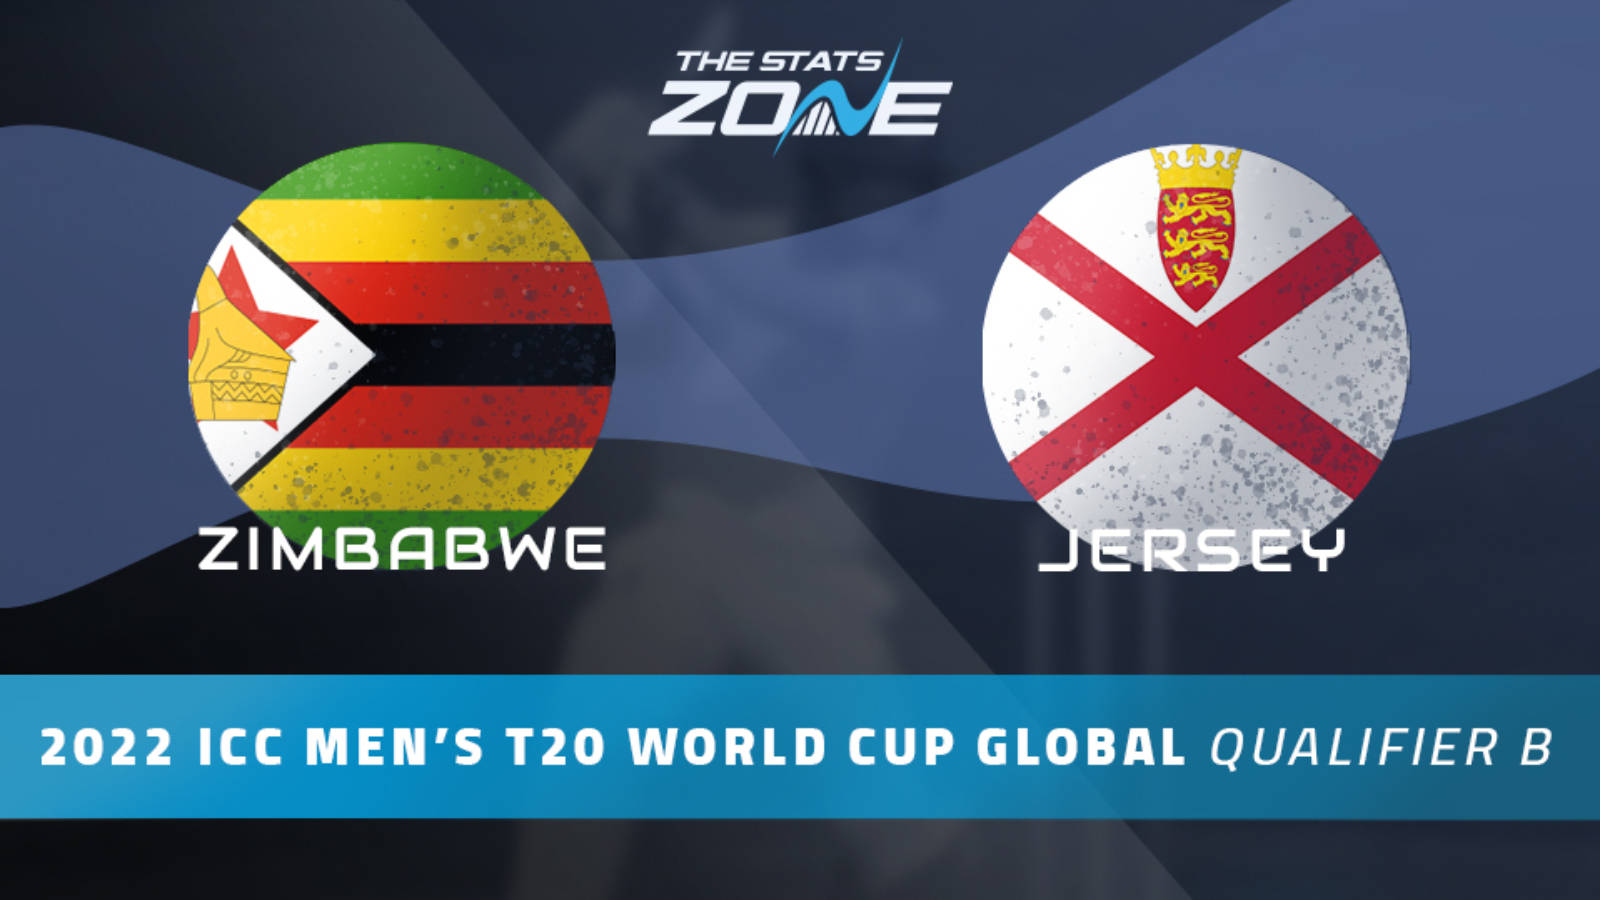 Zimbabwe vs Jersey Global Qualifier B Preview & Prediction 2022